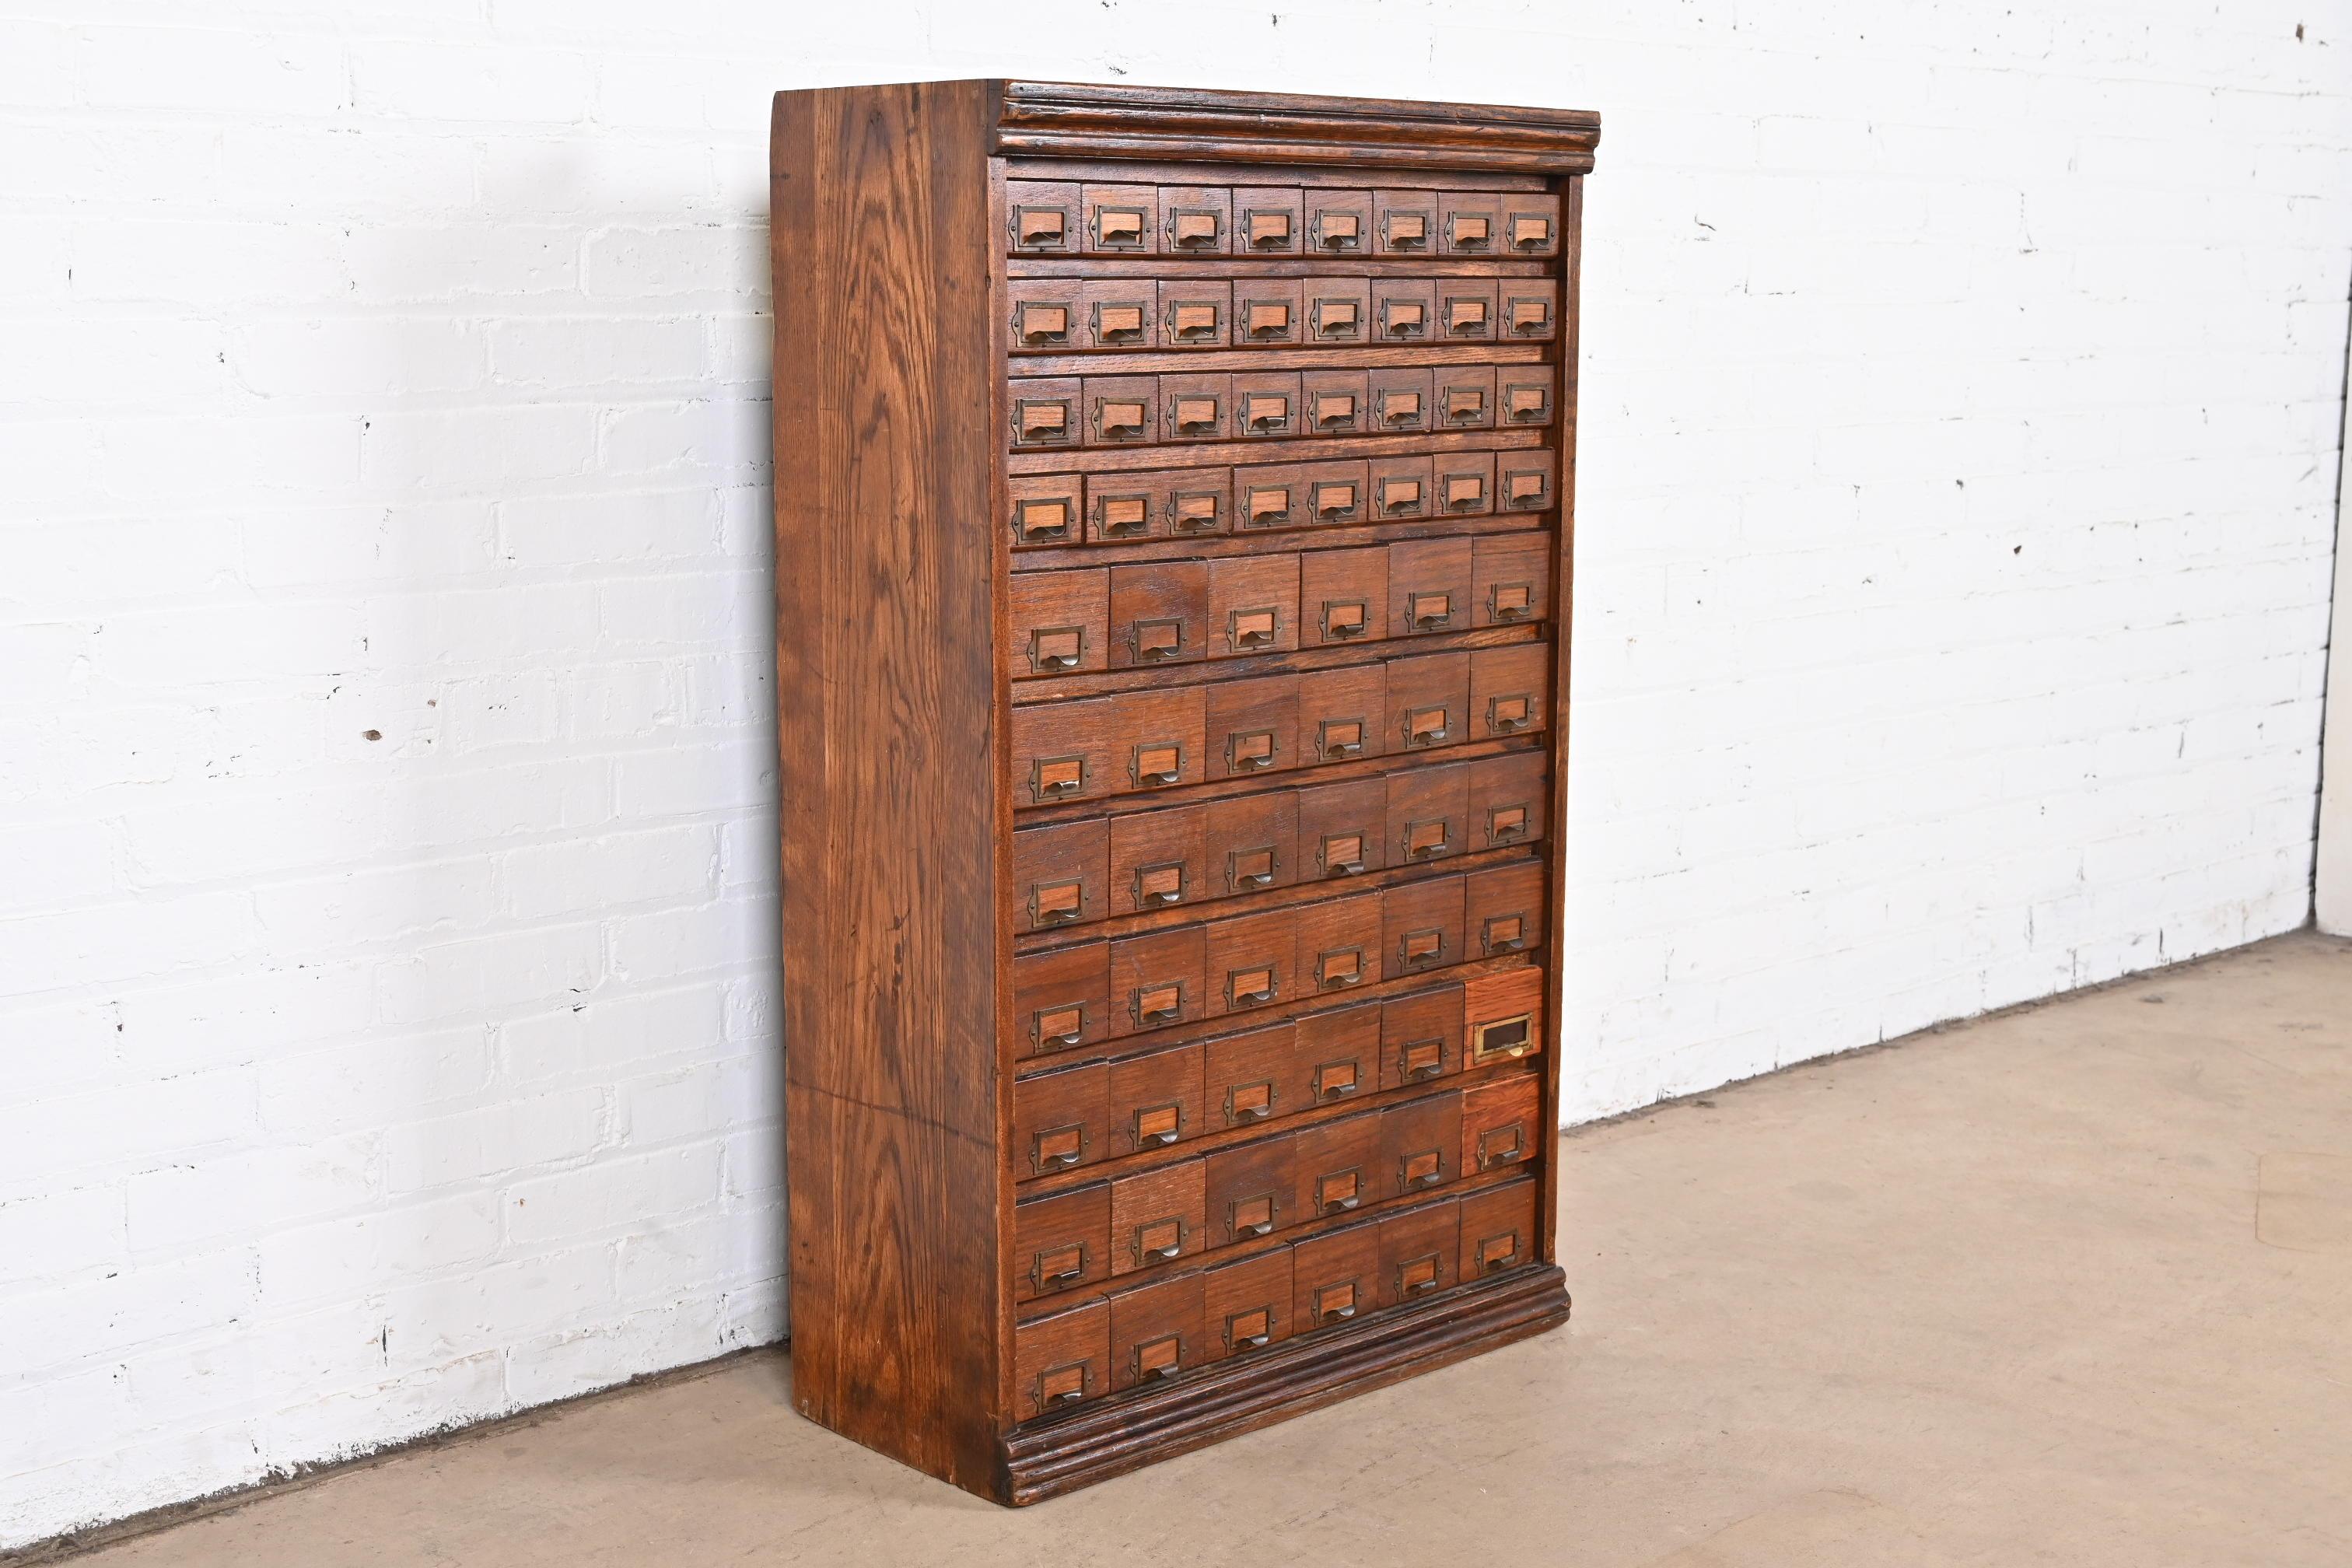 A rare antique Arts & Crafts card file cabinet or industrial parts cabinet

USA, circa 1900

Solid oak, with brass hardware and metal drawer interiors.

Measures: 25.5